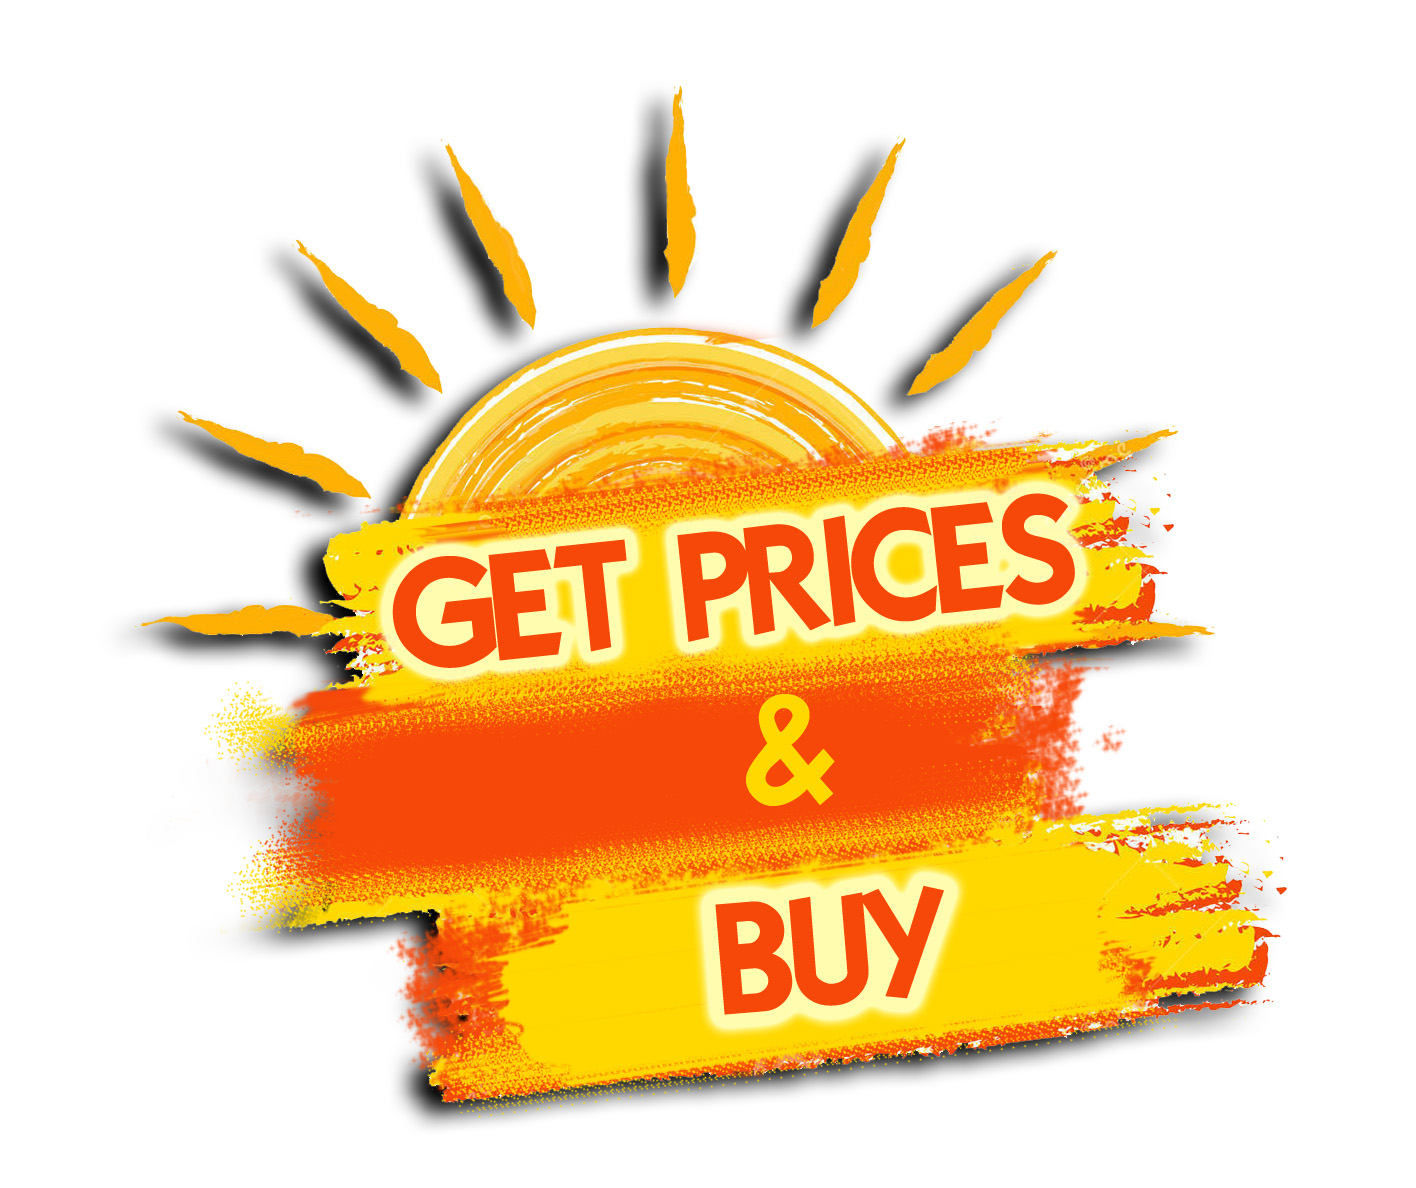 Get Prices & Buy